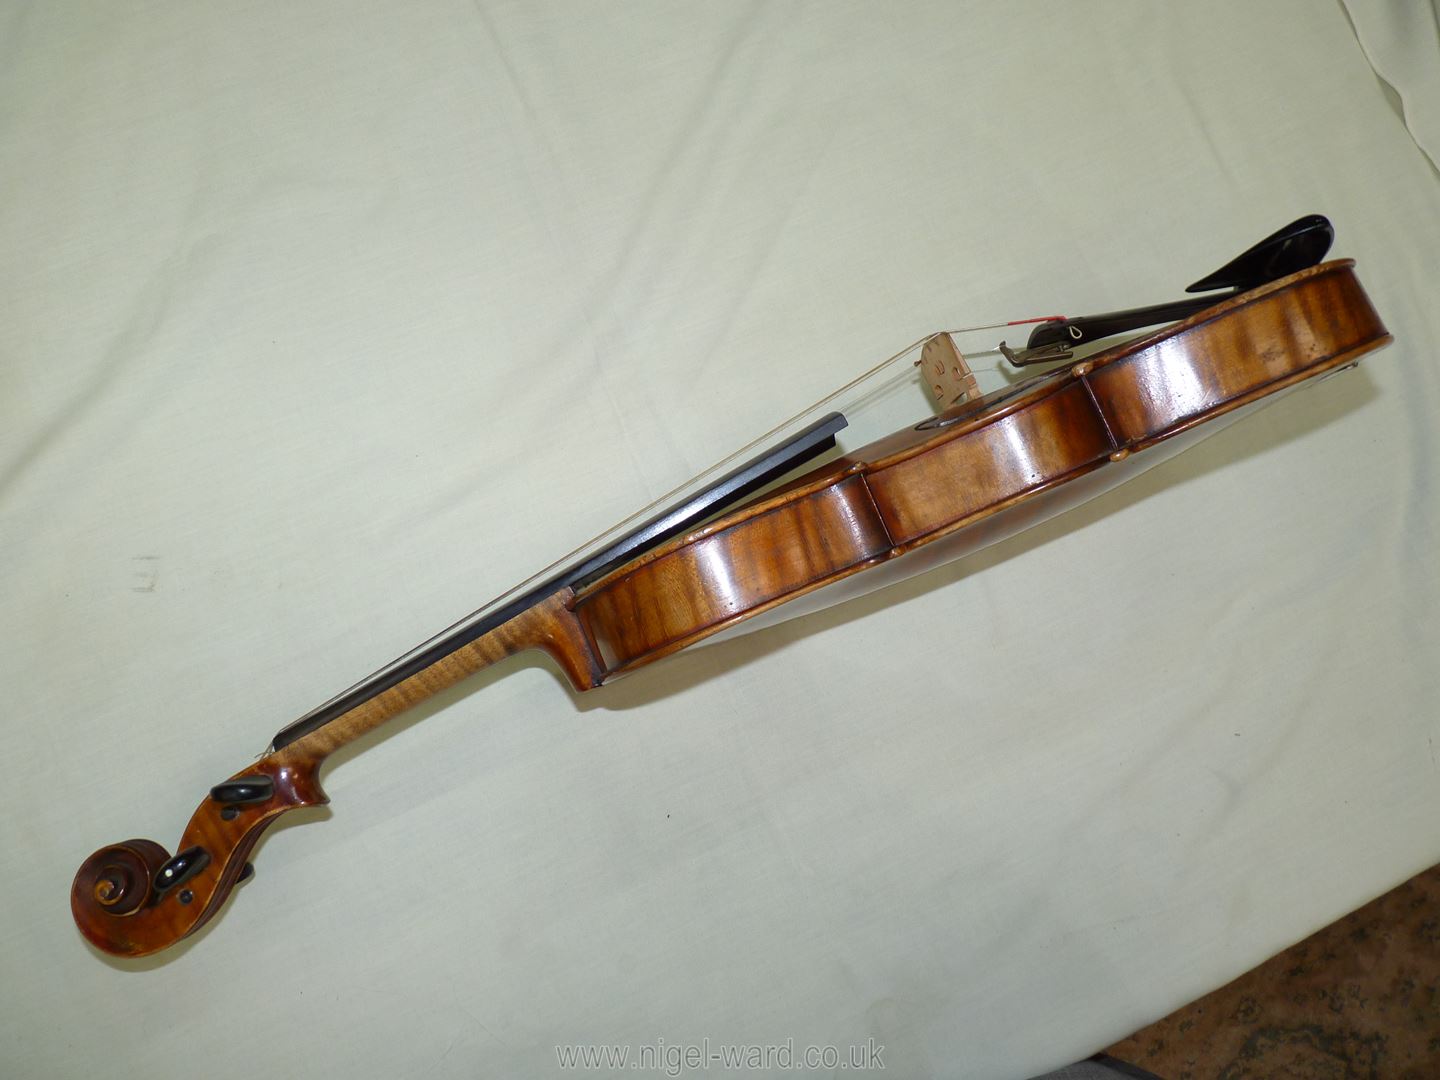 An antique violin having a well-carved scroll and nicely figured body including the back, - Image 6 of 49